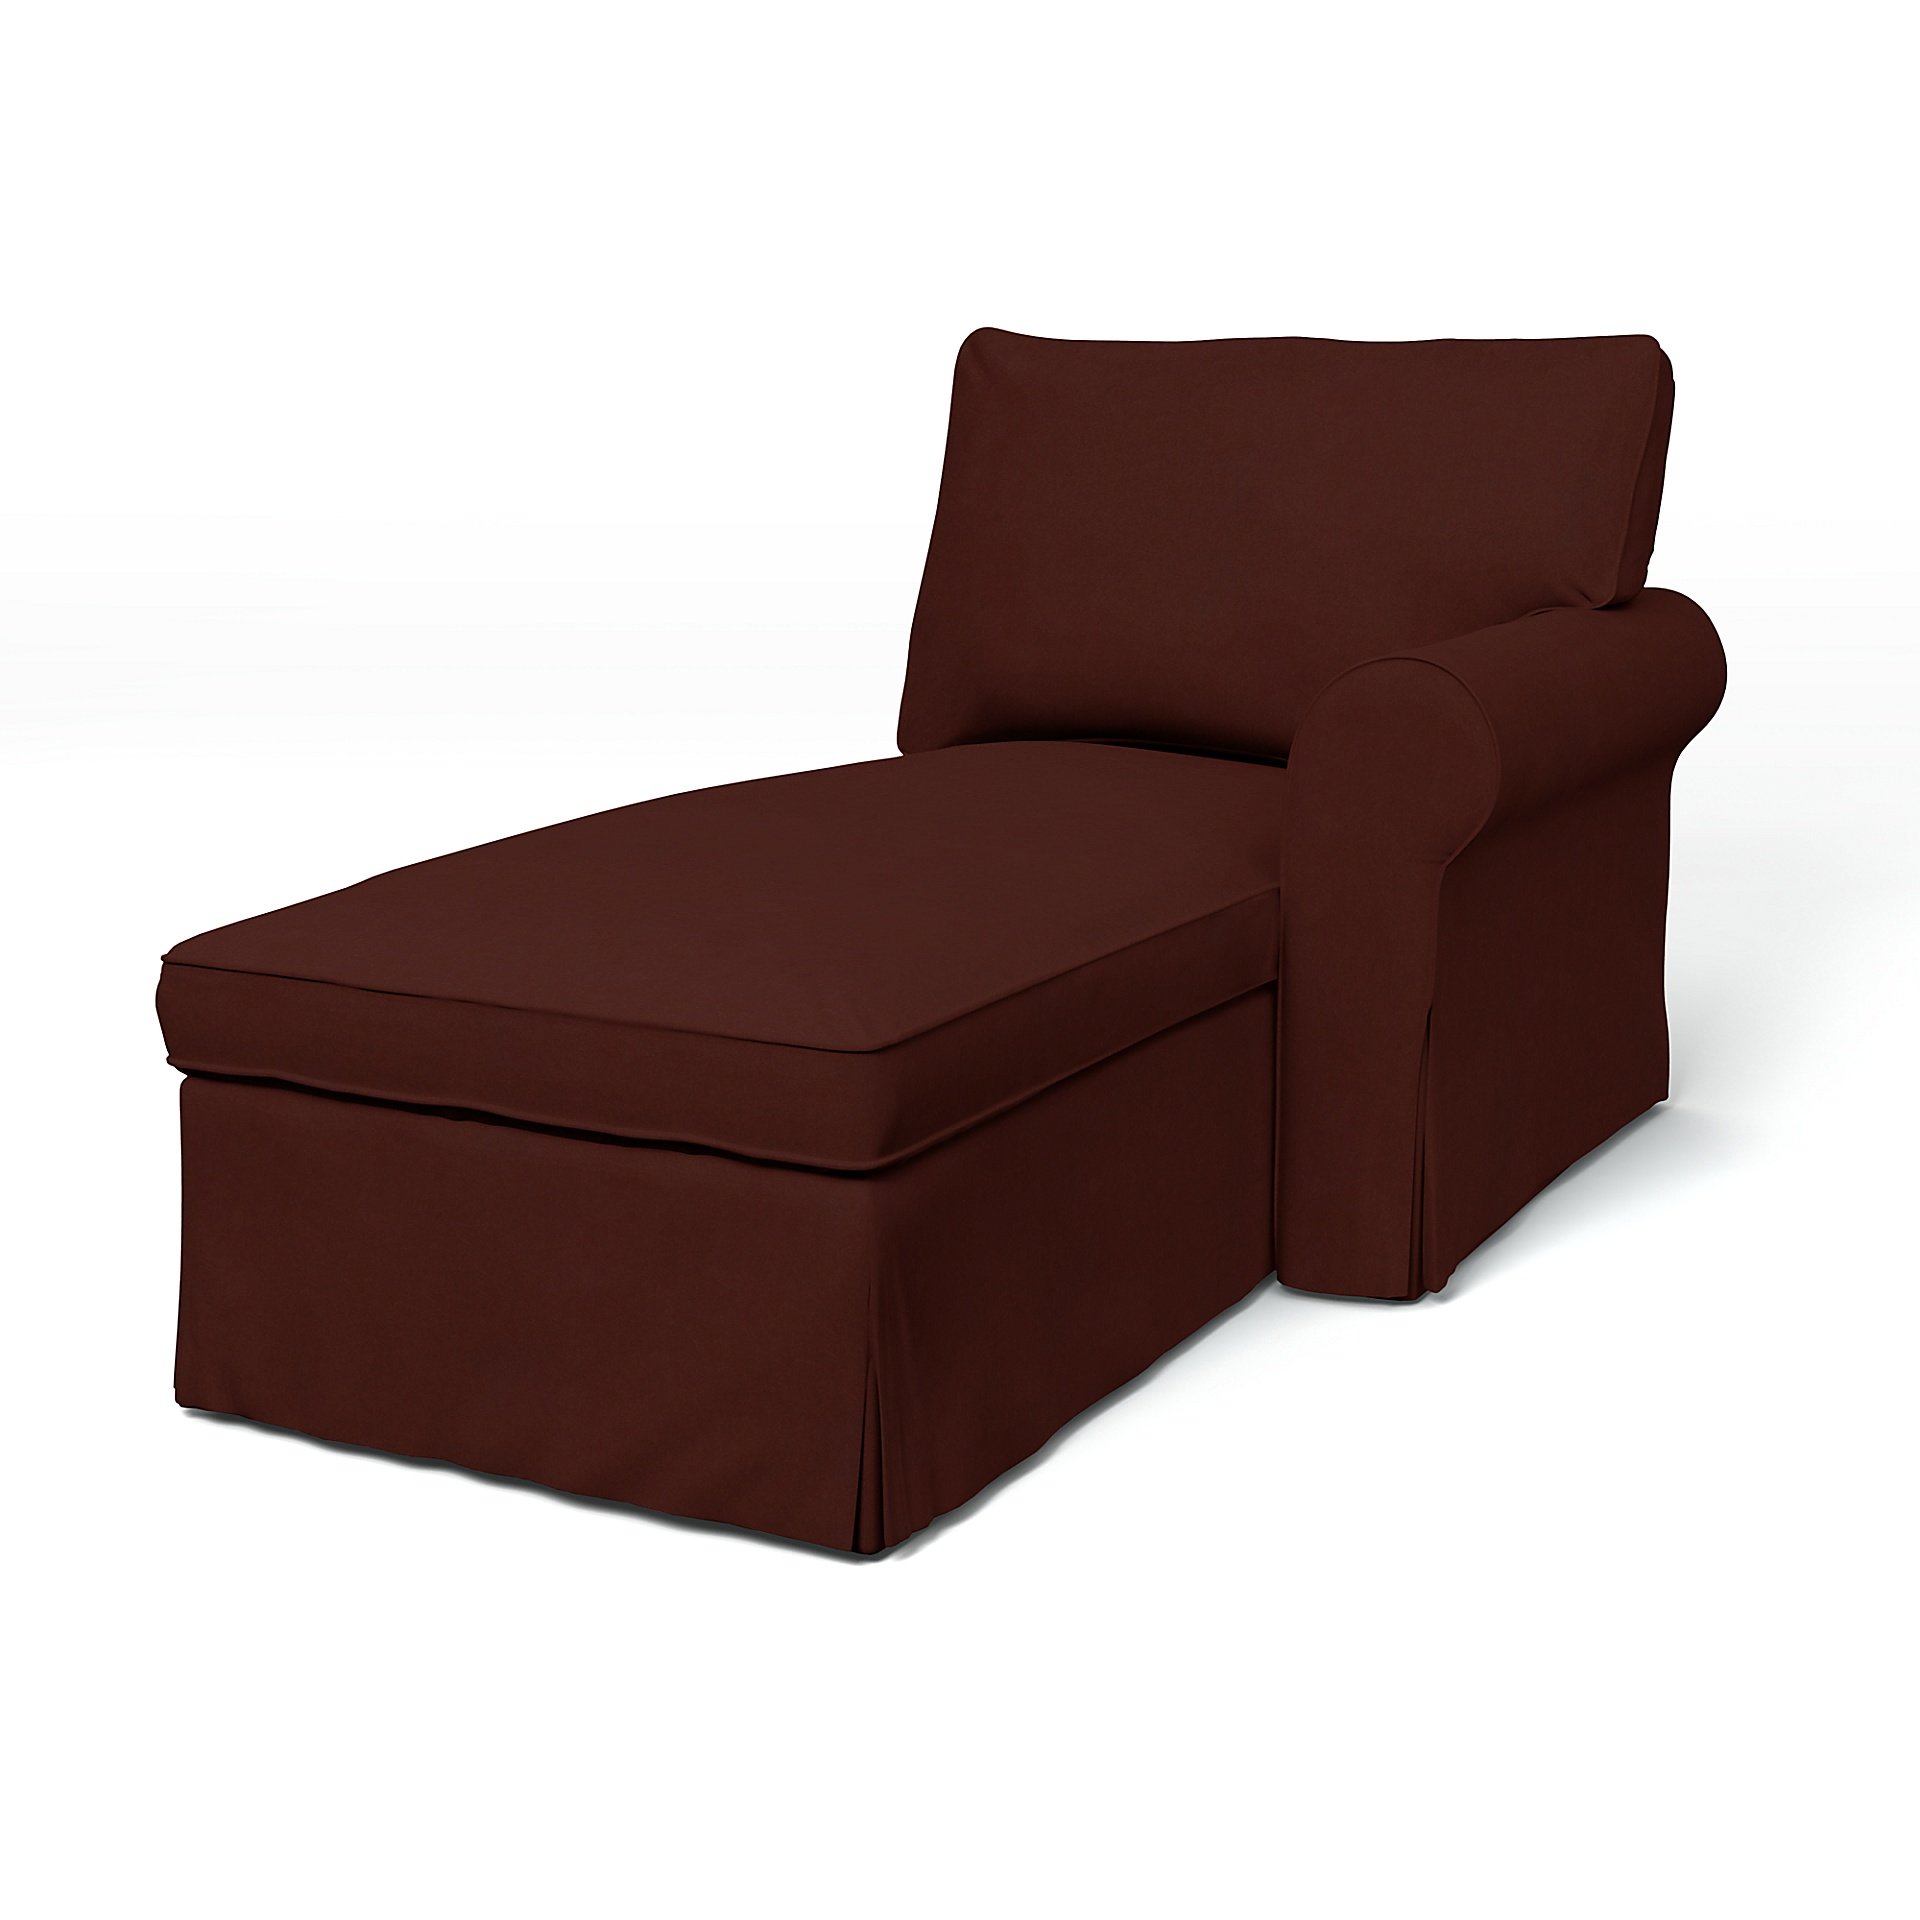 IKEA - Ektorp Chaise with Right Armrest Cover, Ground Coffee, Velvet - Bemz